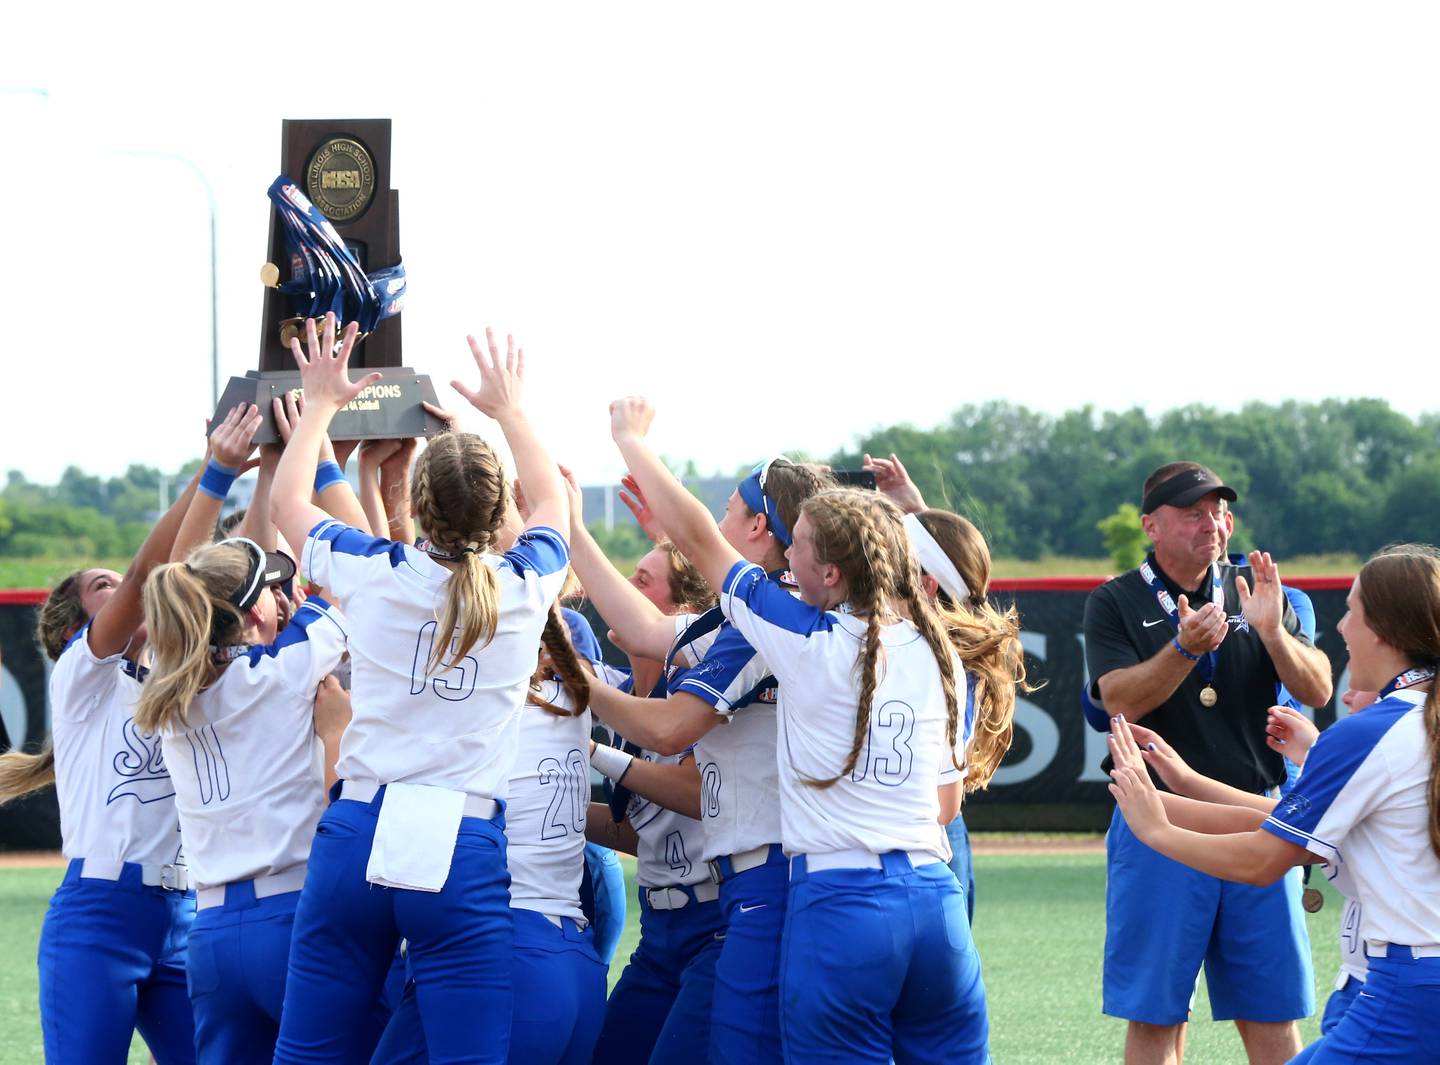 Members of the St. Charles softball team hoist the Class 4A trophy after defeating Chicago Marist 3-2 on Saturday, June 11, 2022 at the Louisville Slugger Complex in Peoria.